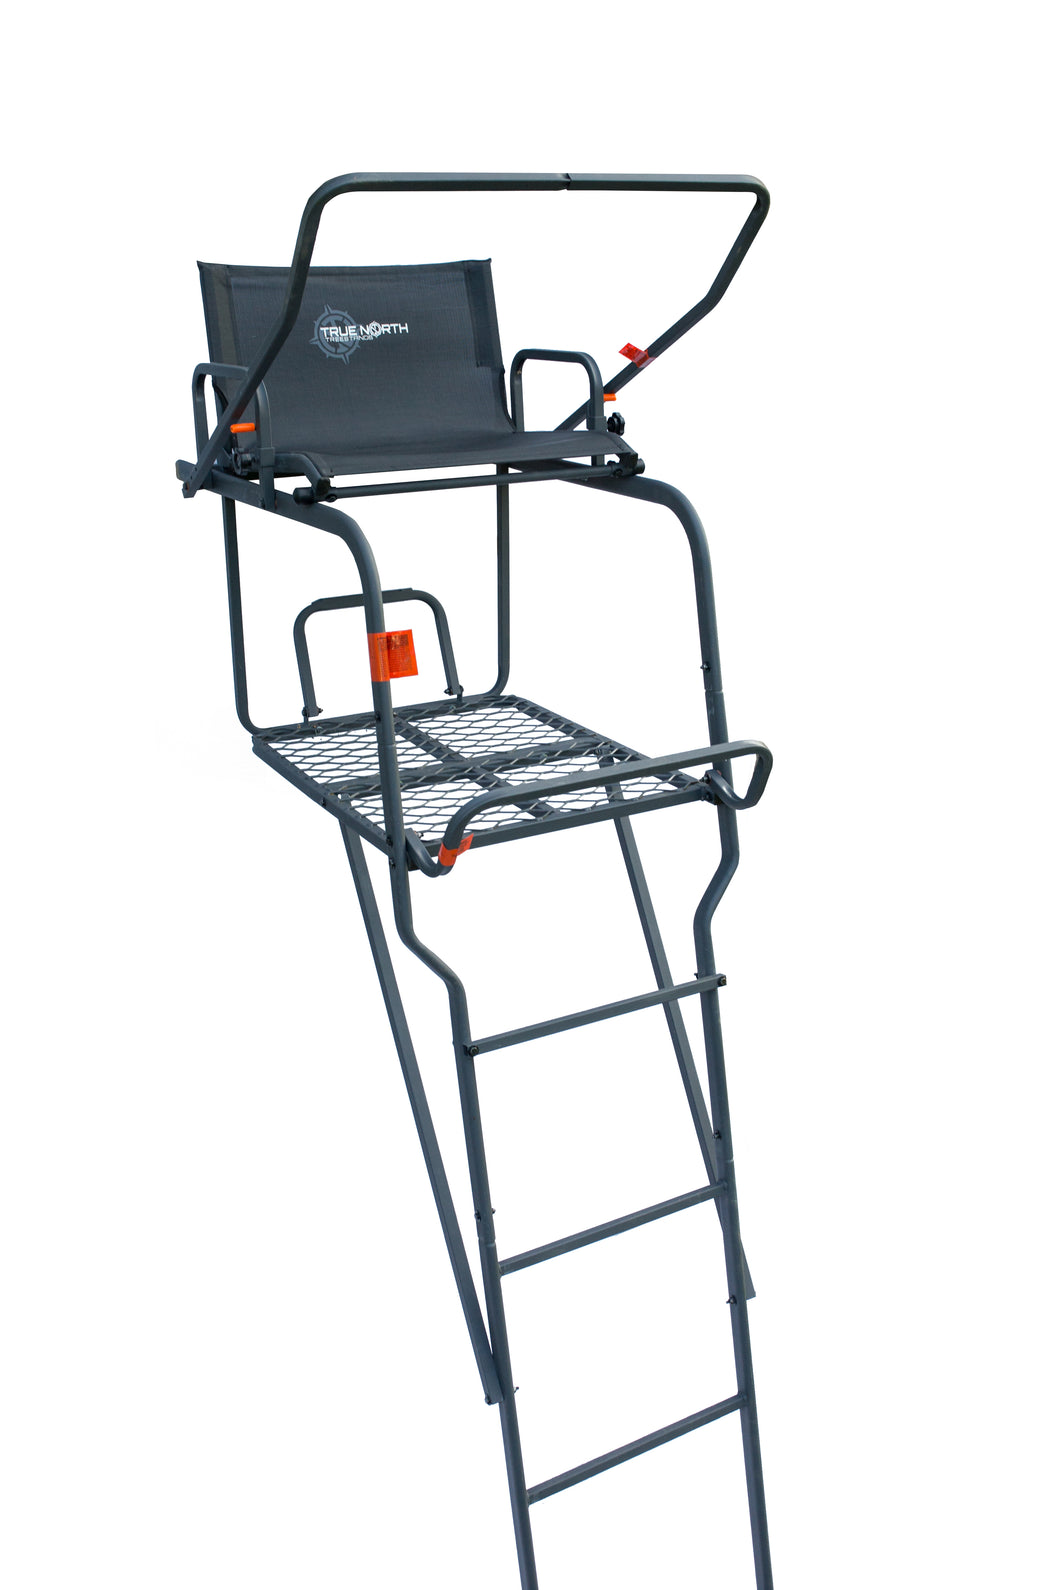 RISE SC LADDER STAND (SCRATCH AND BLEMSIH/FINAL BLOW-OUT PRICE)